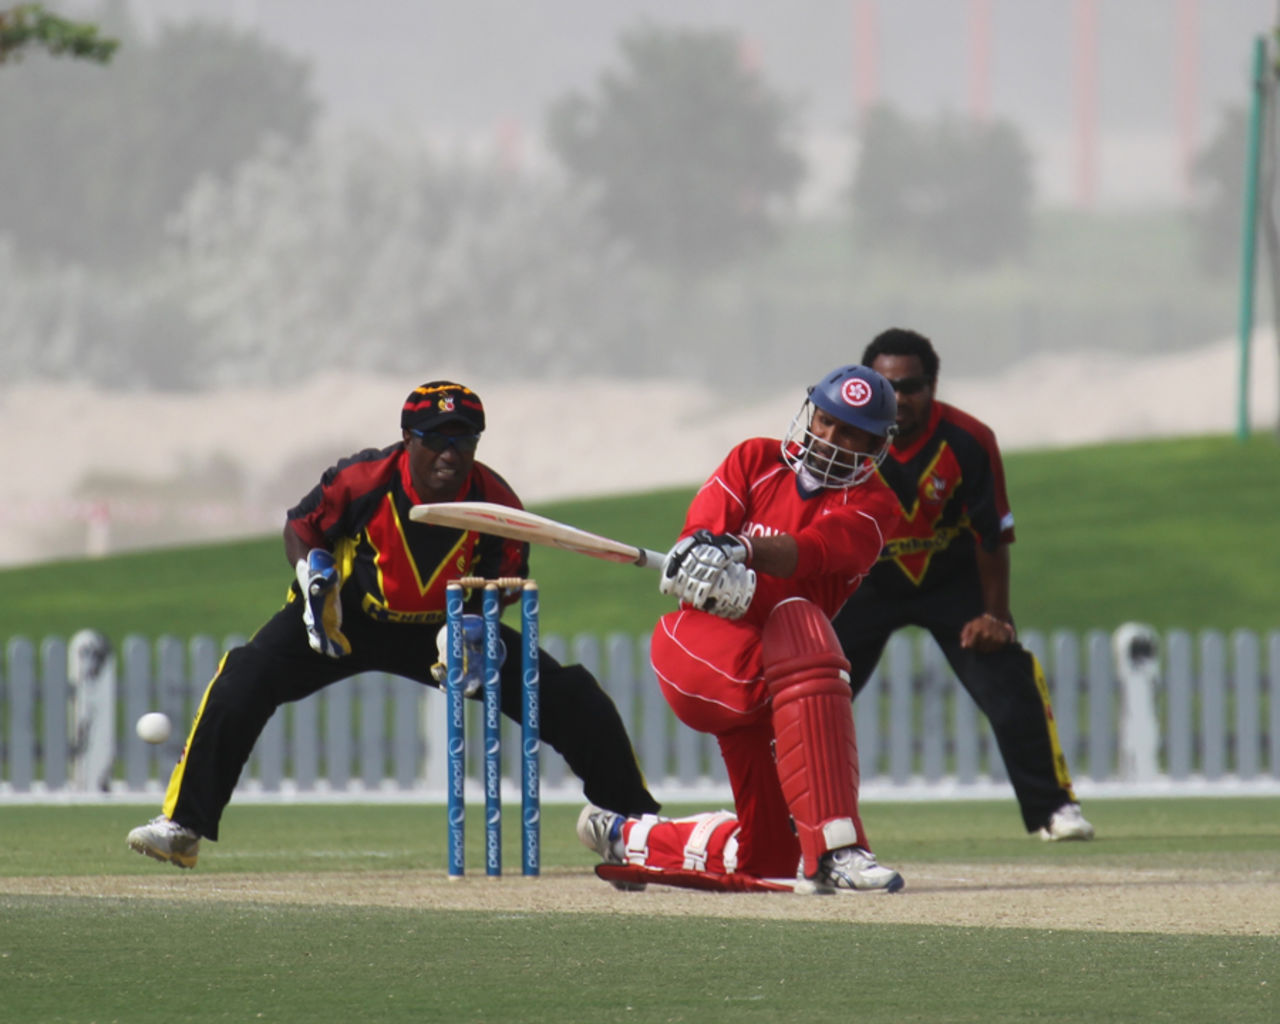 Najeeb Amar sweeps against PNG in the 3rd/4th Play-off match at the ICC WCL2 in Dubai on 15th April 2011